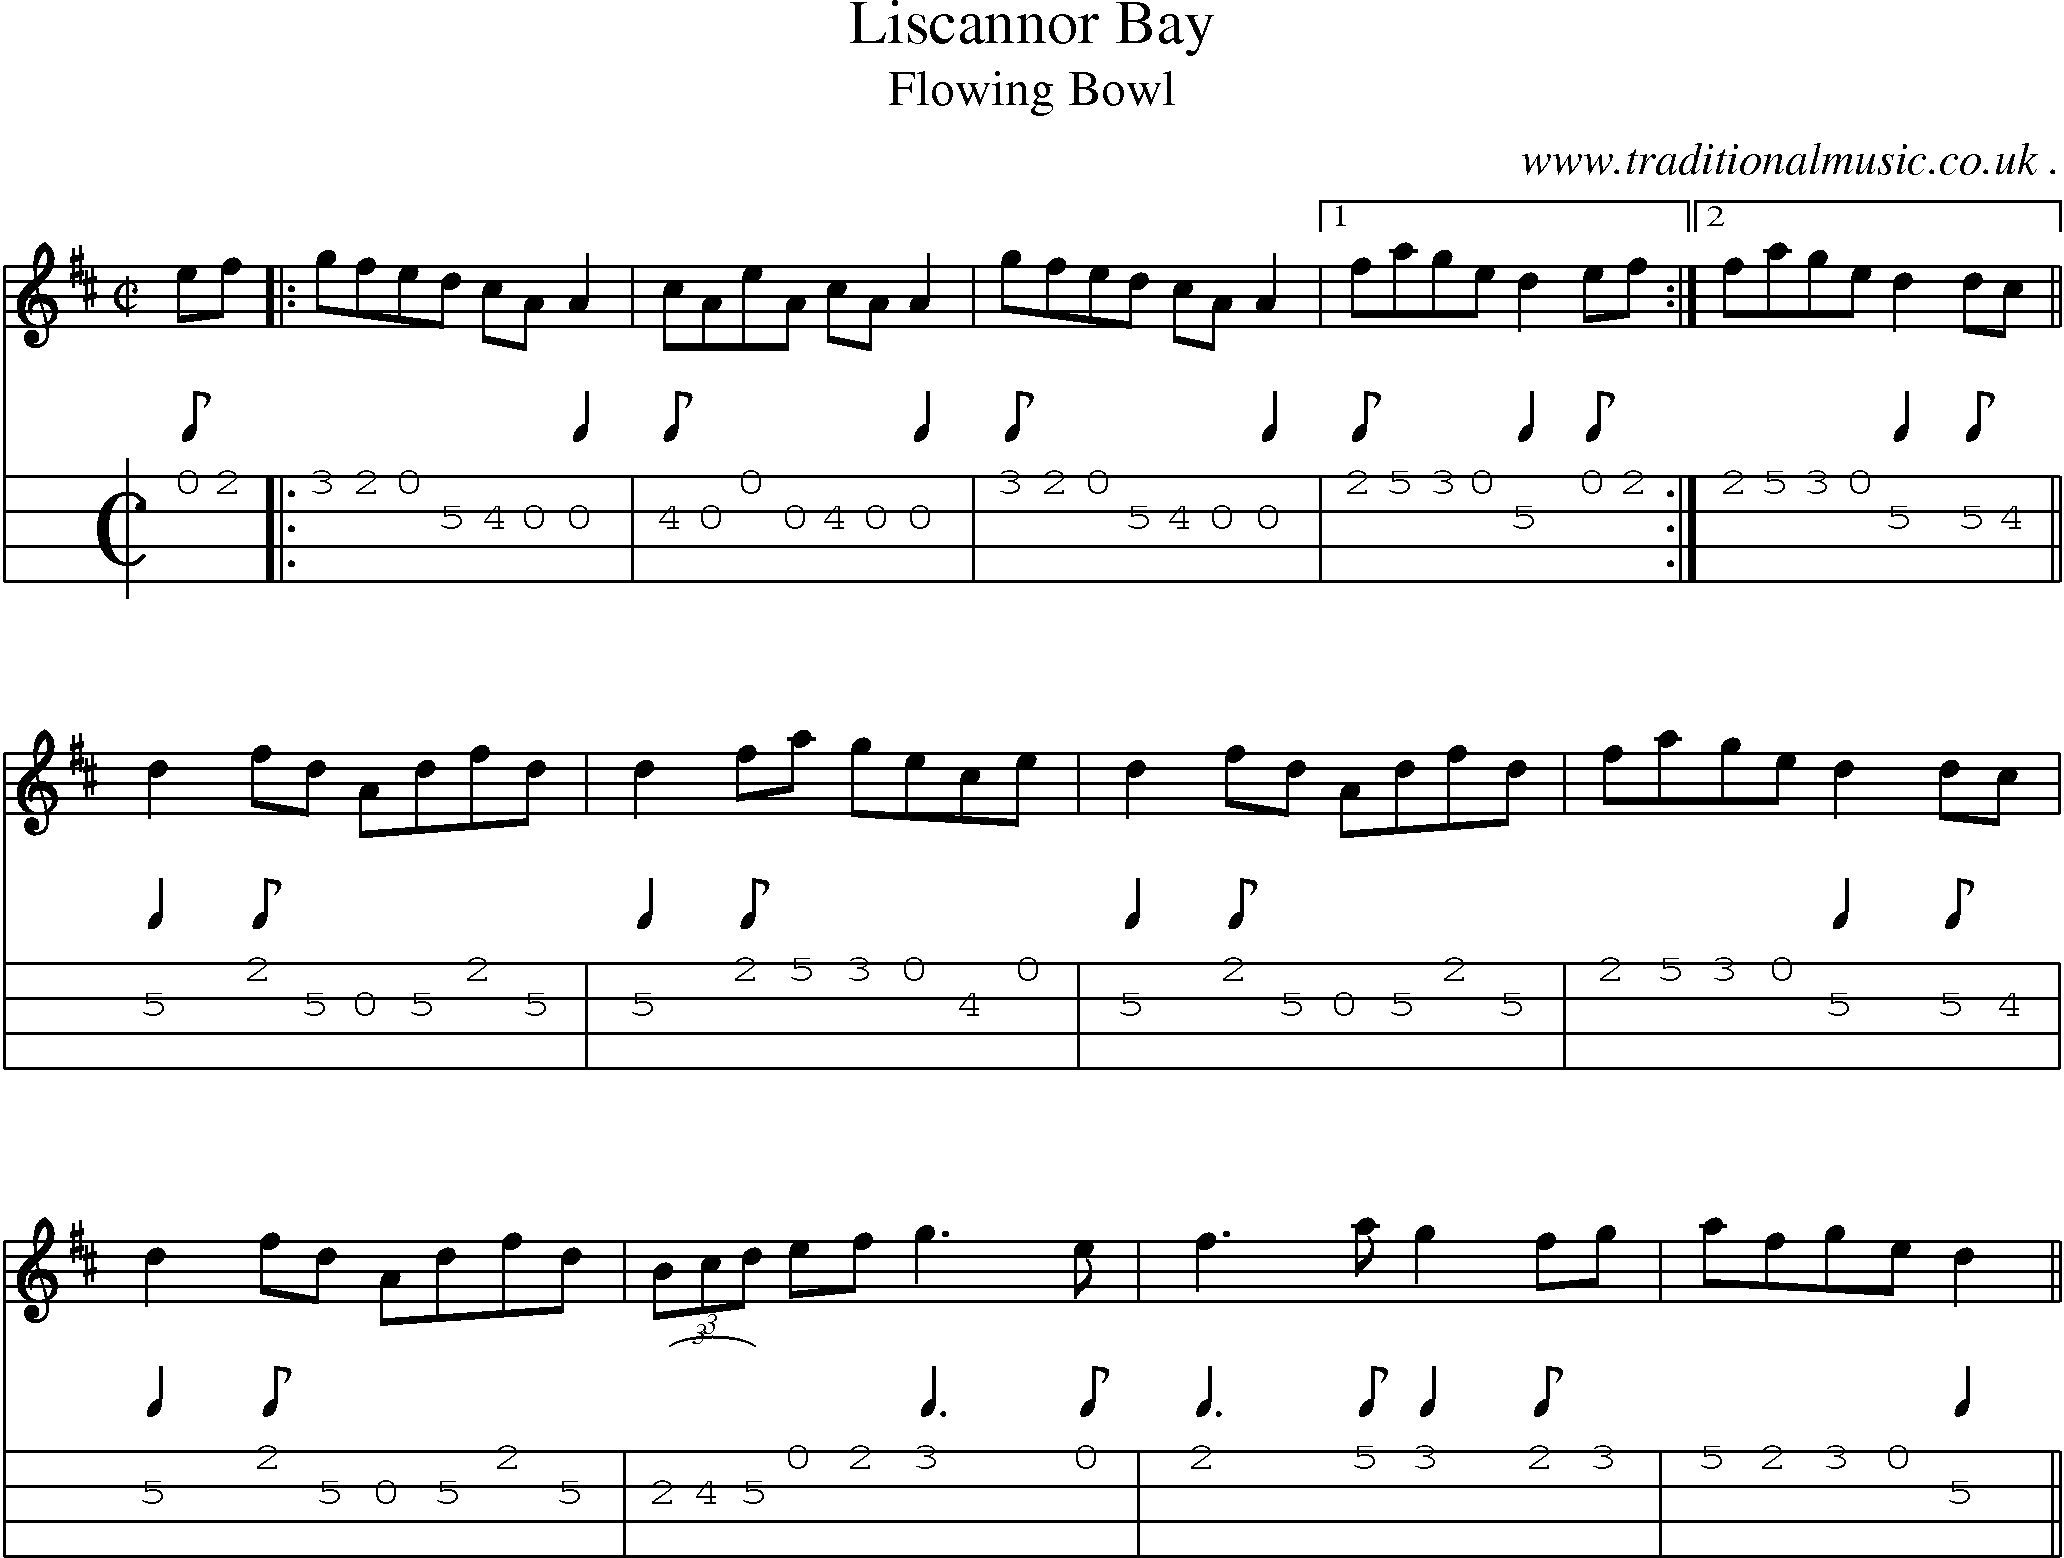 Sheet-Music and Mandolin Tabs for Liscannor Bay